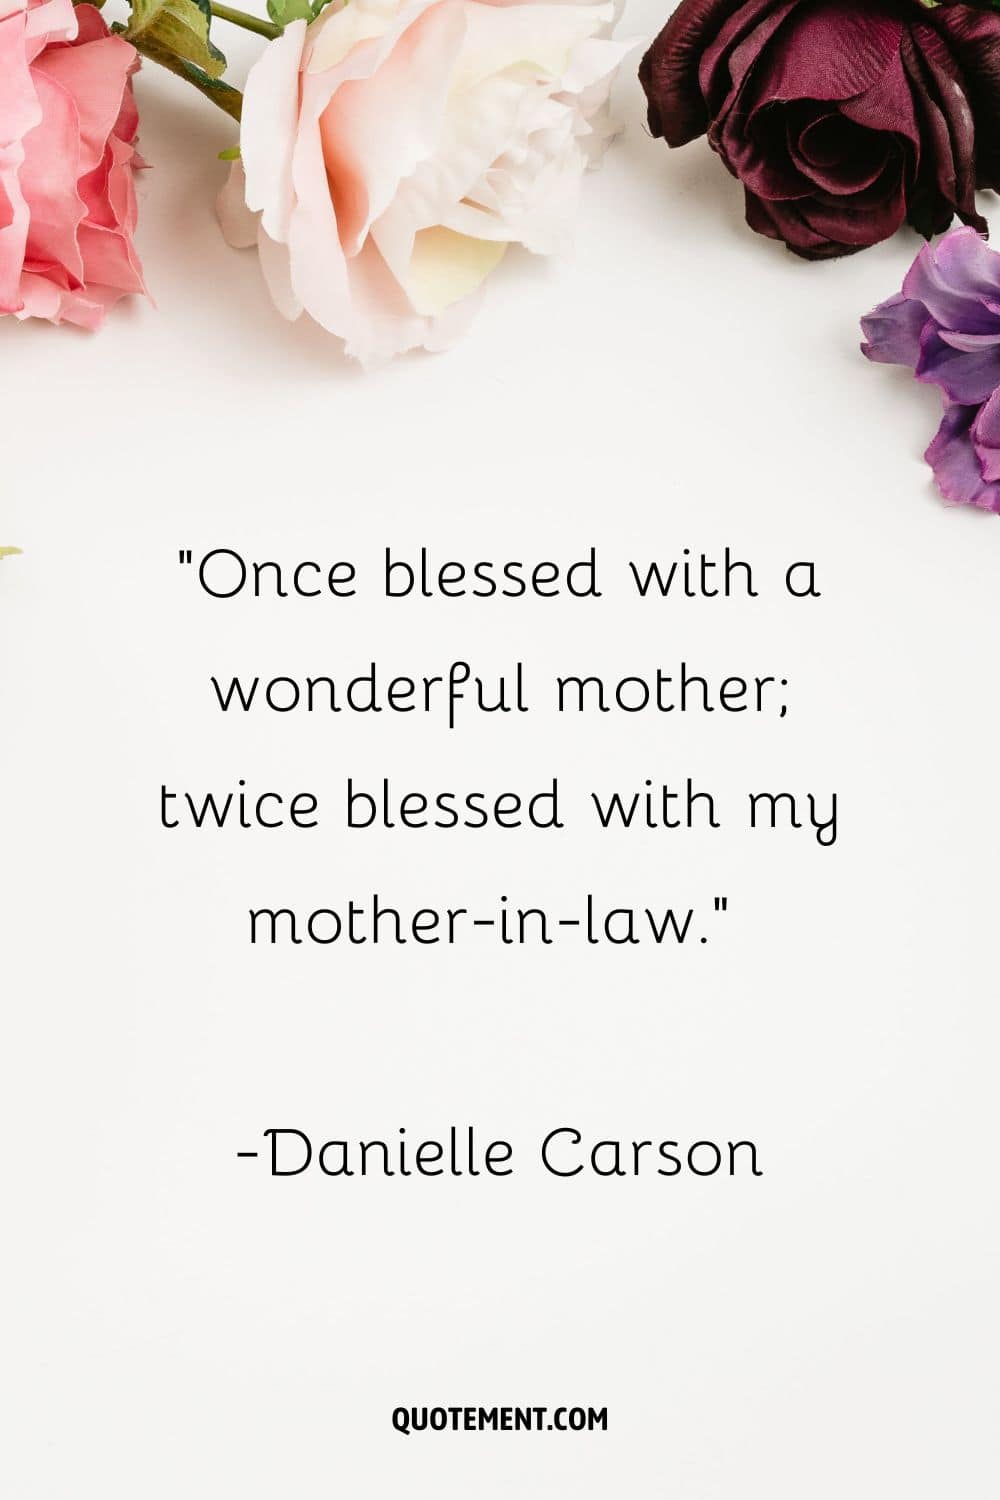 Inspirational mom-in-law quote on a vibrant floral backdrop.